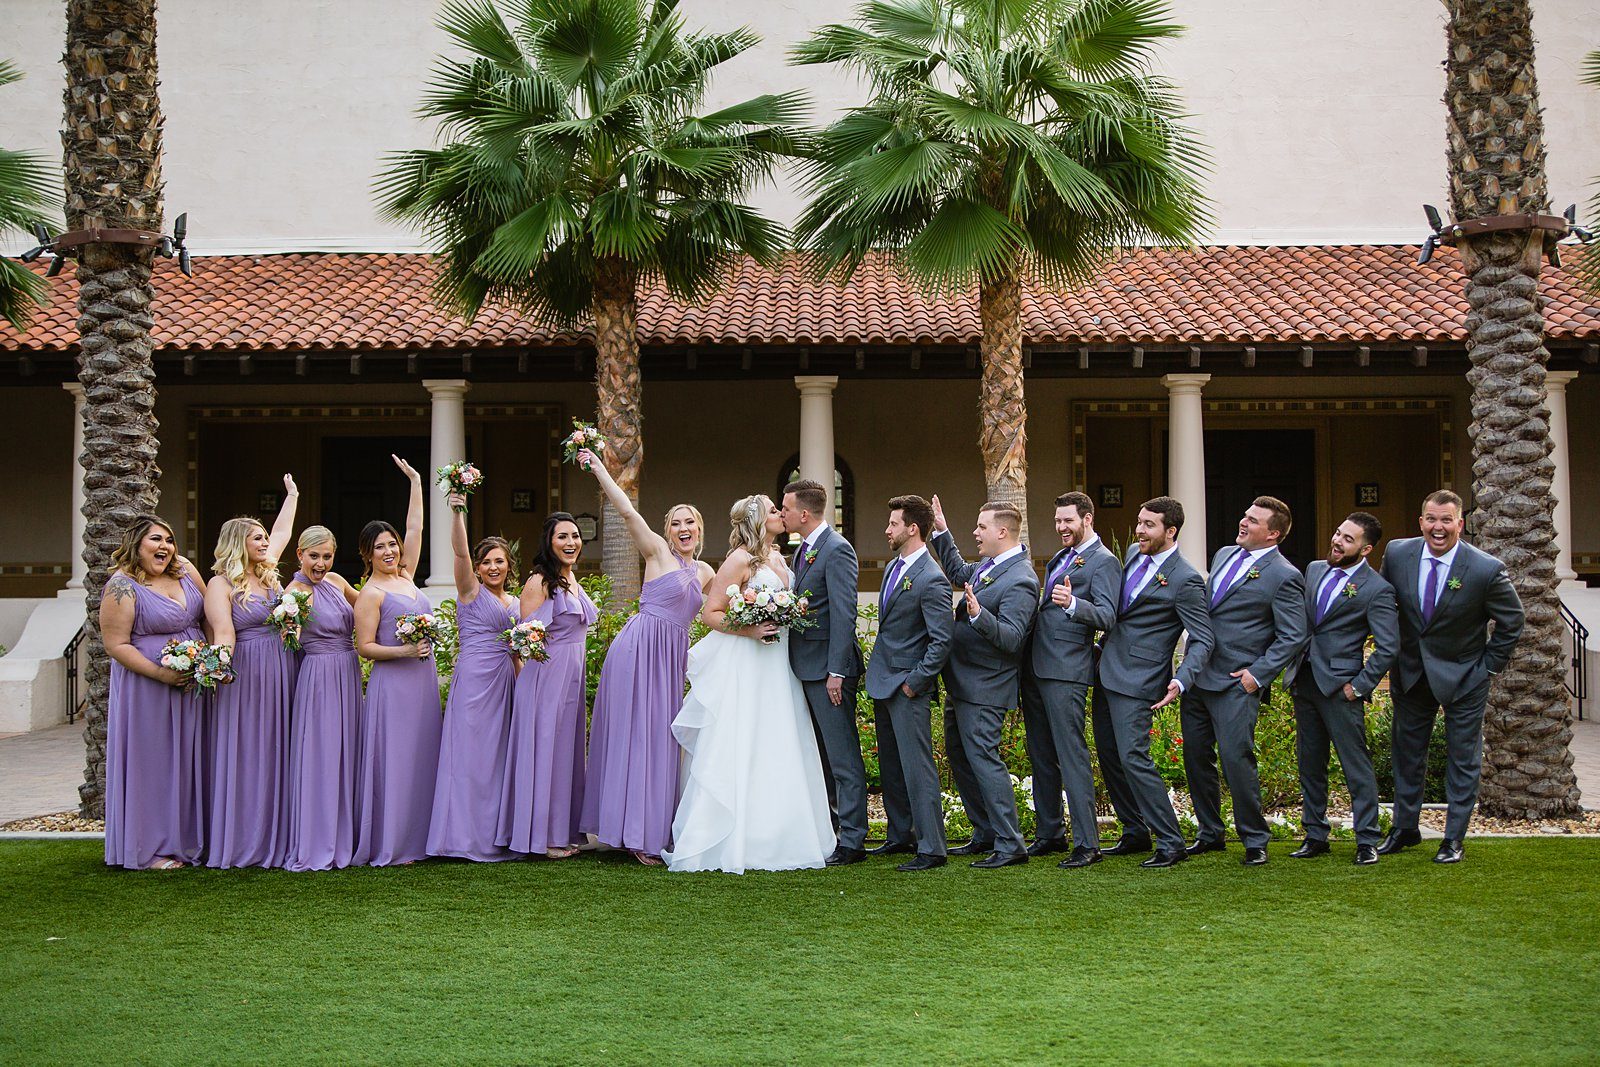 Bridal party having fun together at The Scottsdale Resort at McCormick Ranch weding by Arizona wedding photographer PMA Photography.